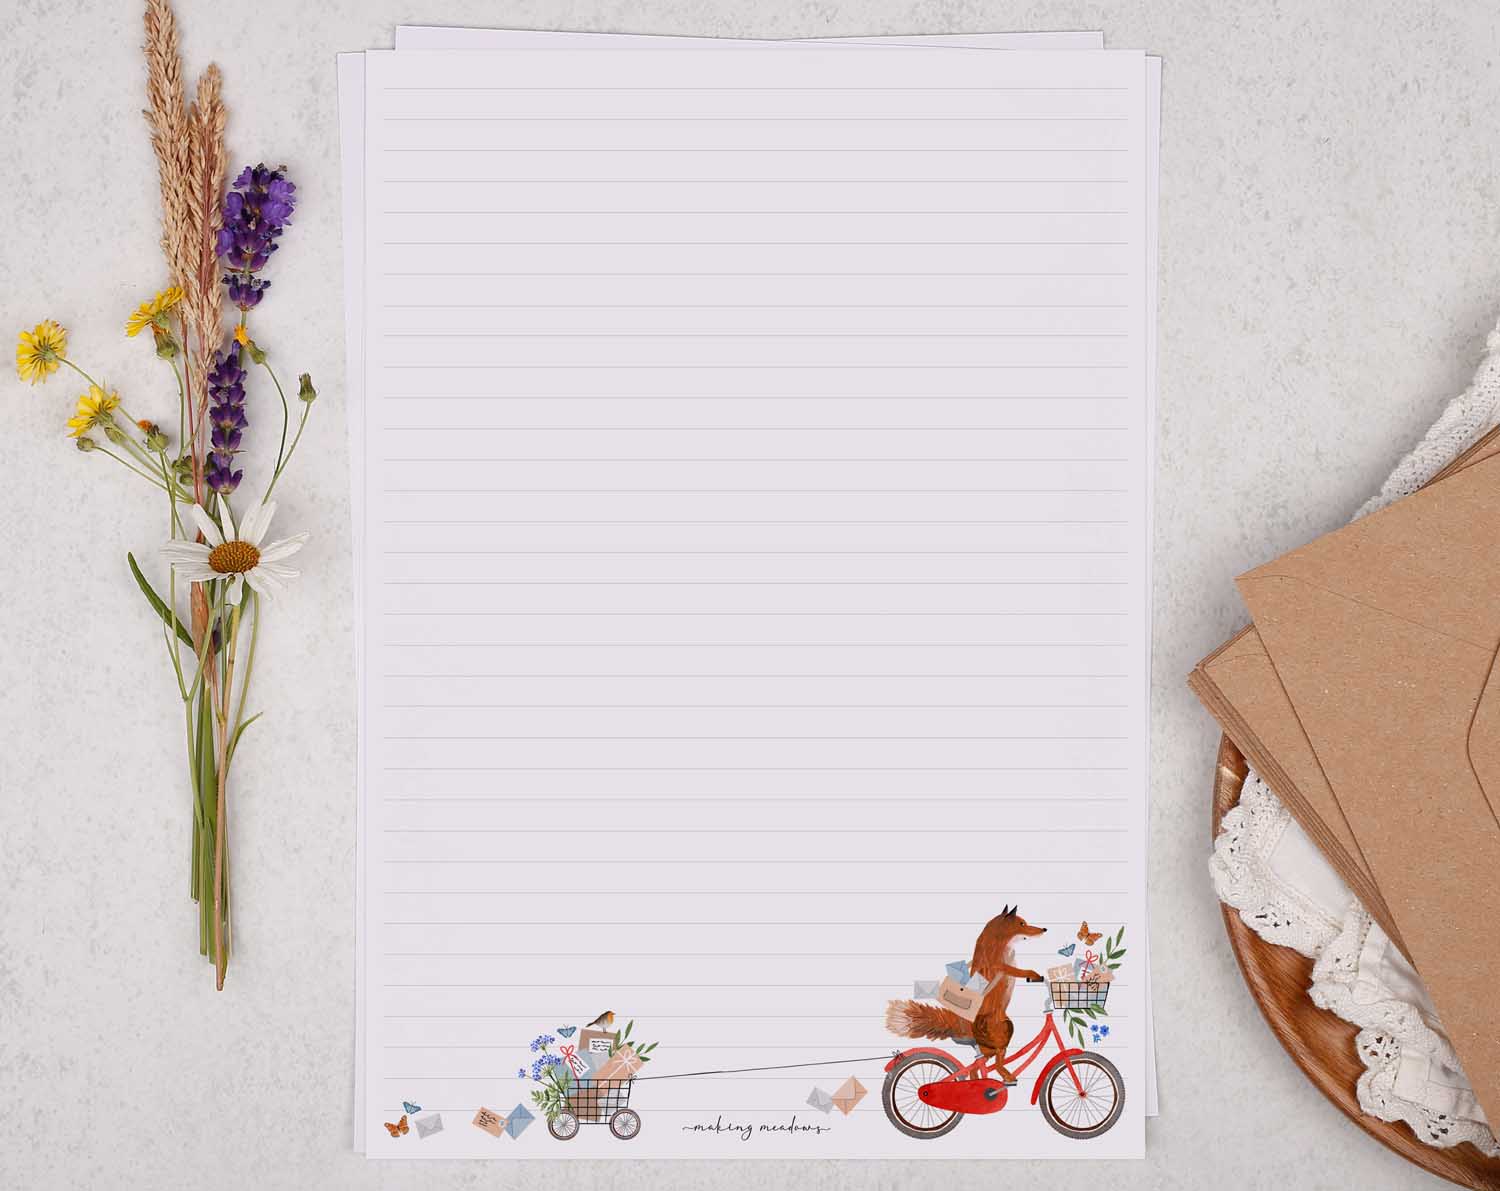 A4 letter writing paper sheets with an illustration of a fox on a bike.